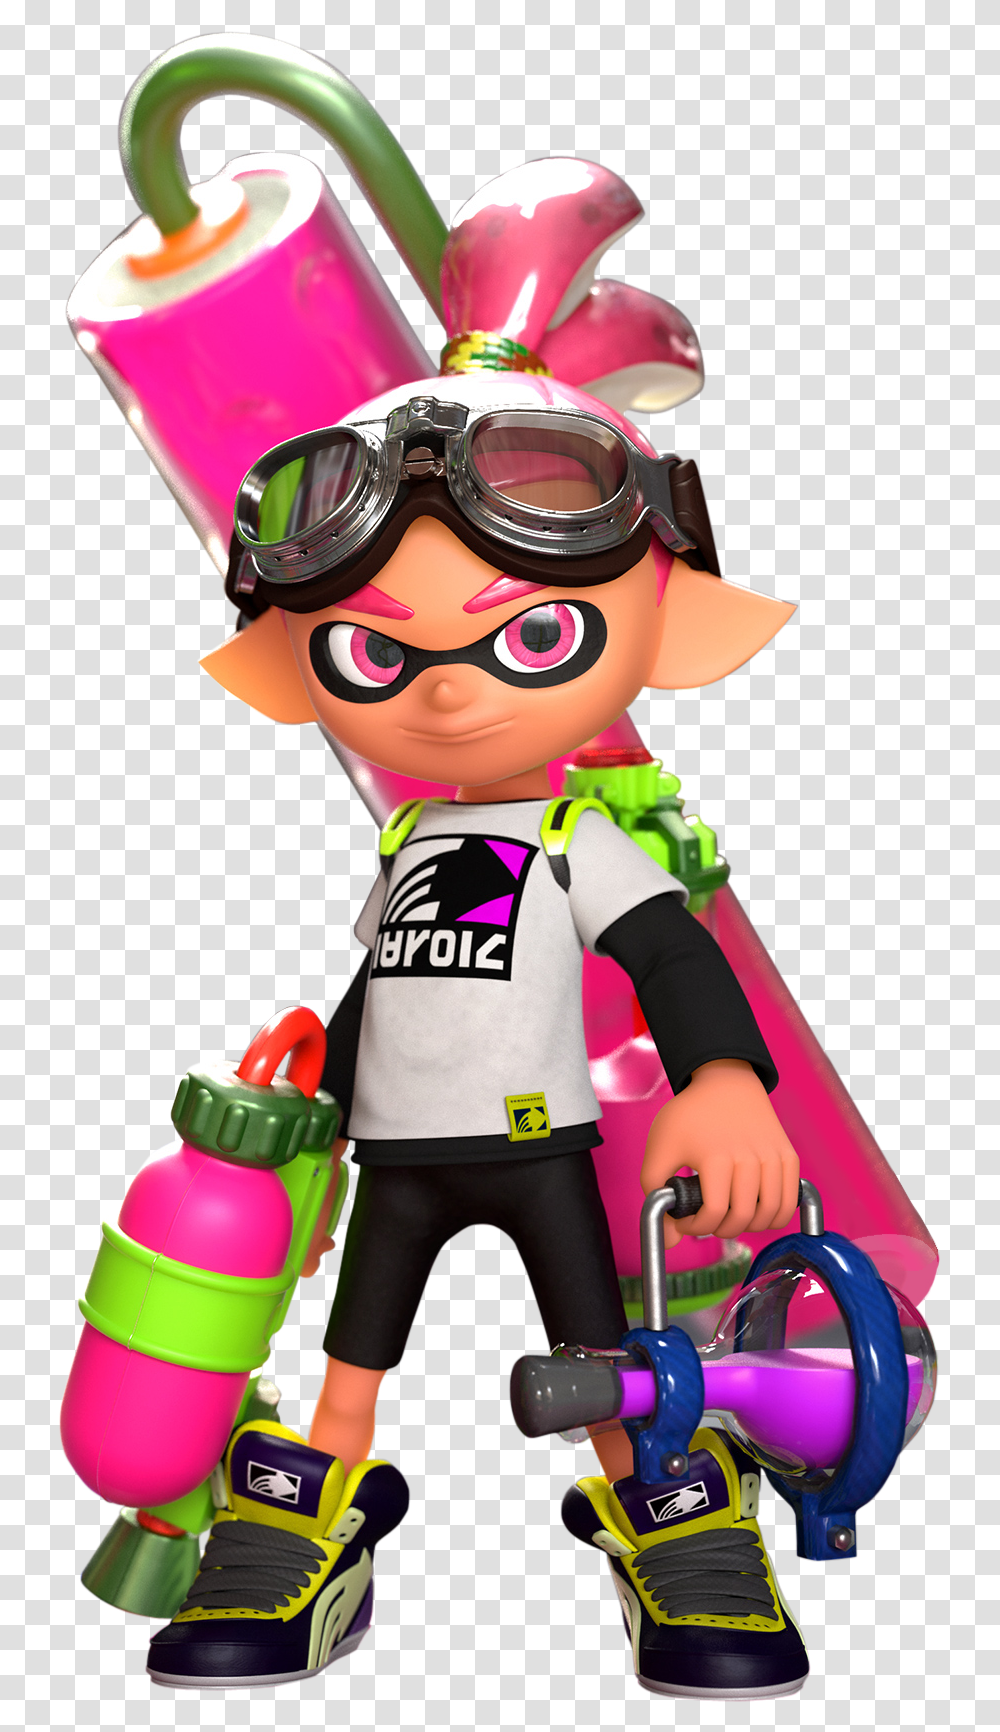 Inkling Boy Clip Royalty Free Download Splatoon Inkling Boy Pink, Goggles, Accessories, Accessory, Sunglasses Transparent Png